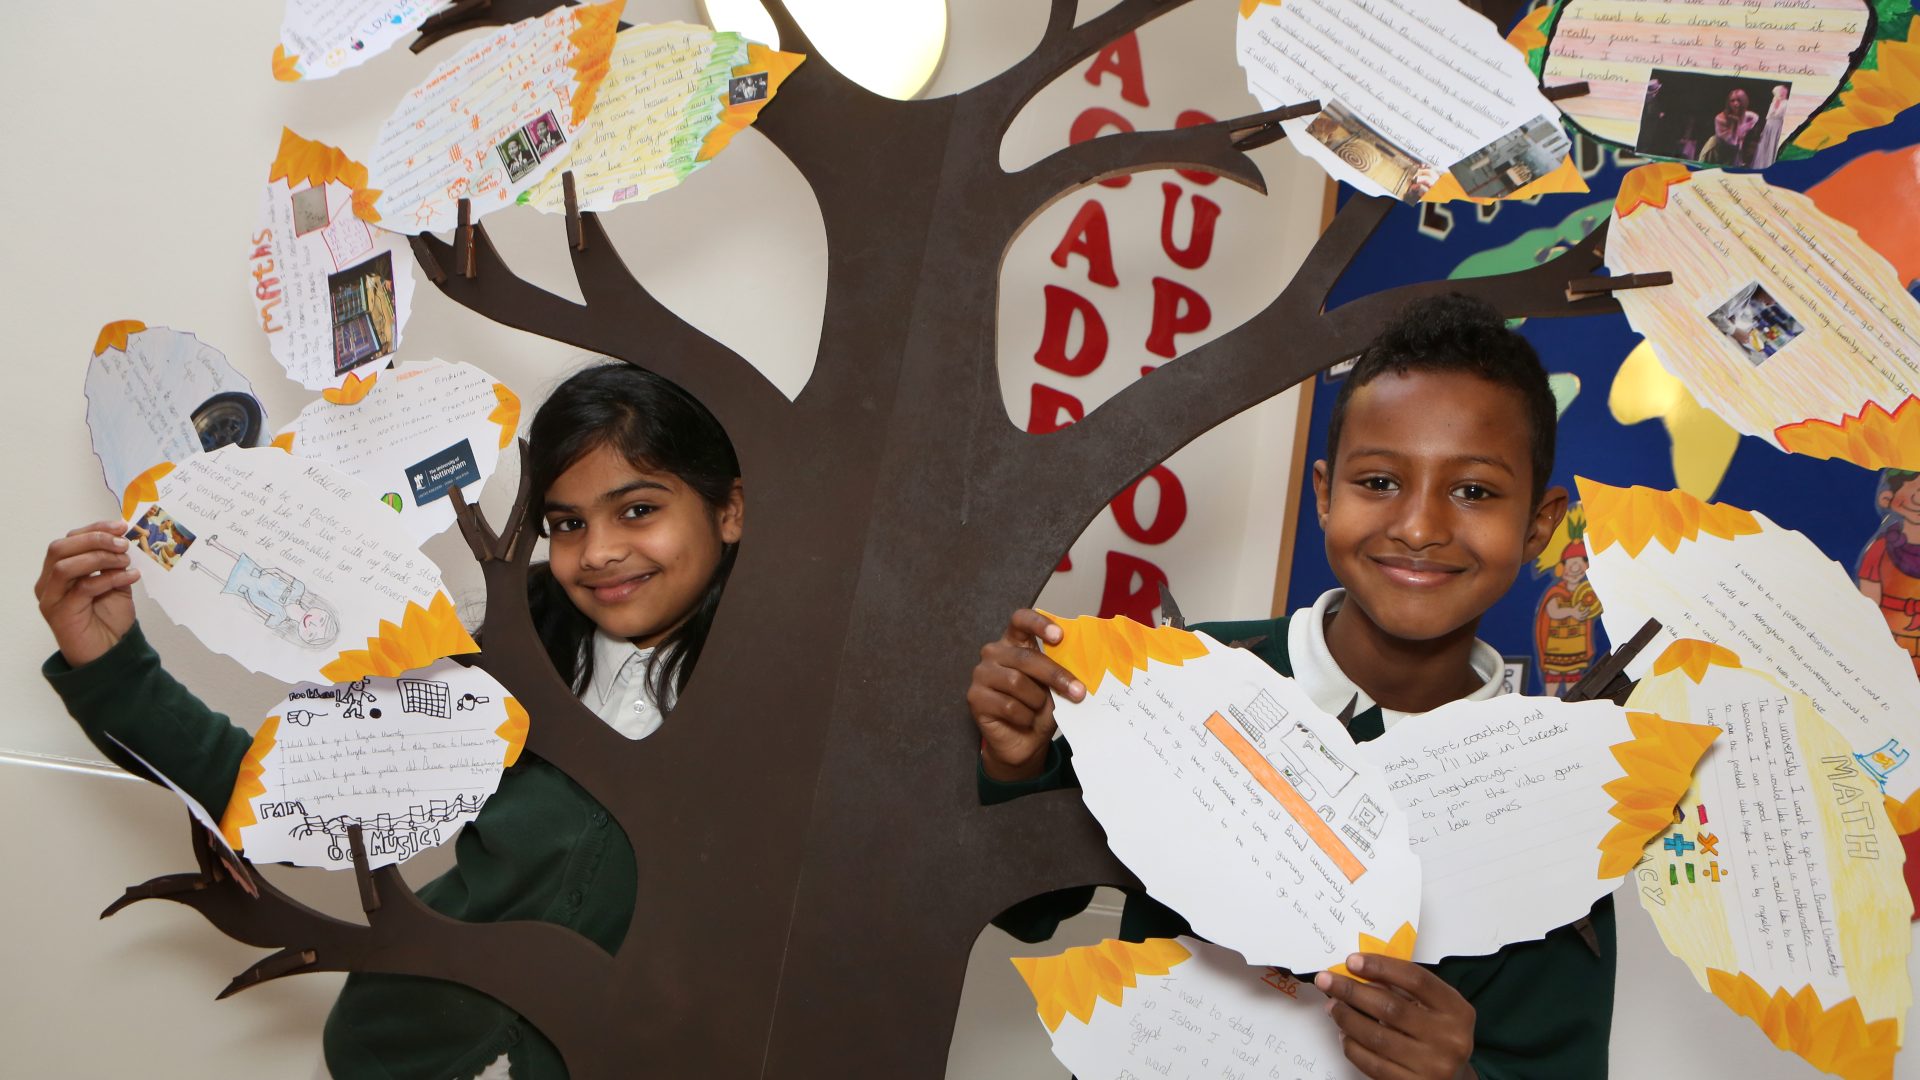 Nottingham Primary students pose near a constructed wooden tree which displays paper leaves where students have written their ambitions for the future.